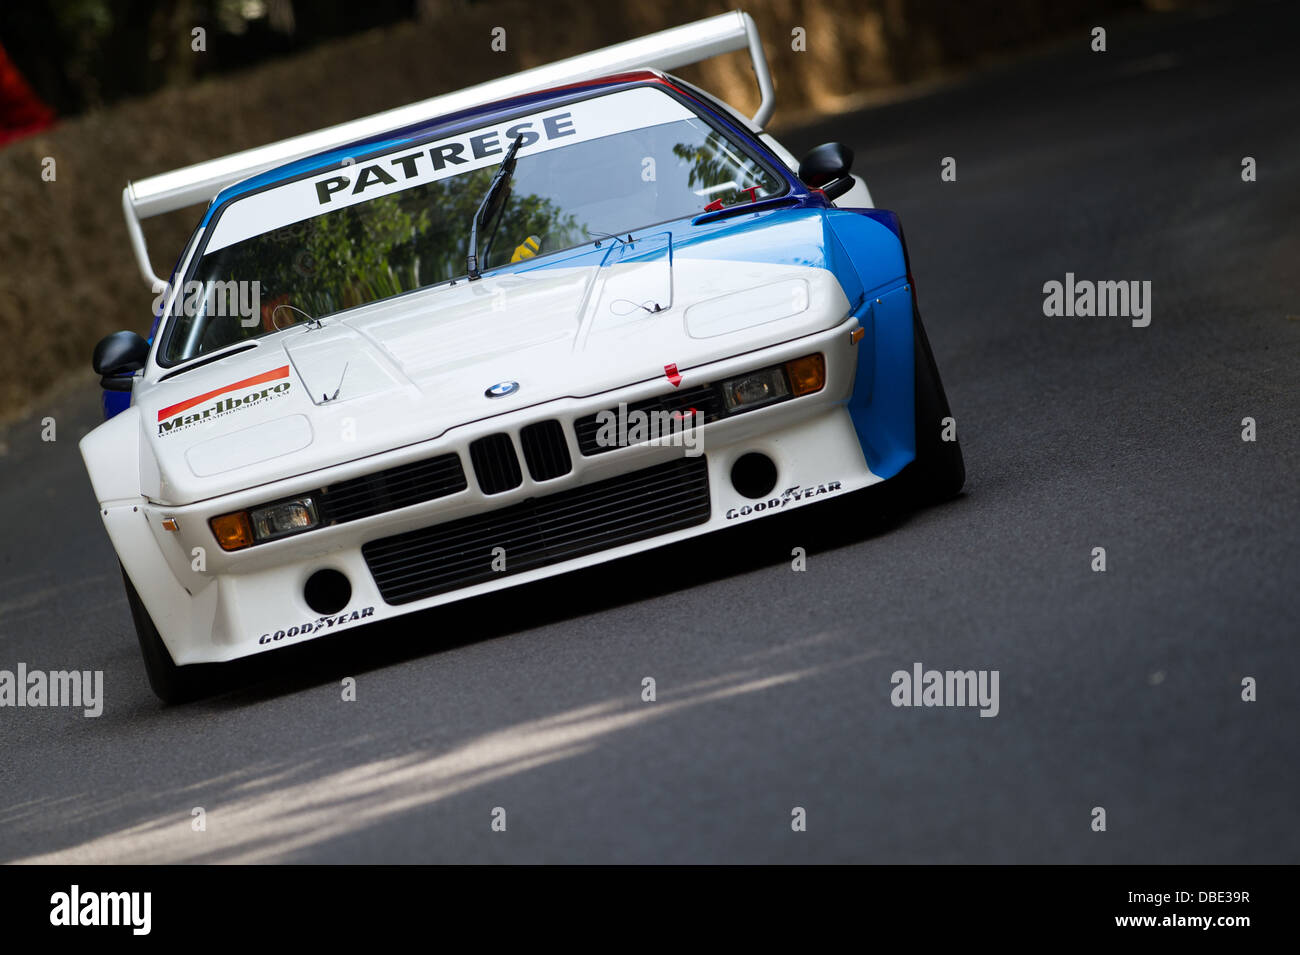 Chichester, UK - July 2013: BMW M1 Procar in action at the Goodwood Festival of Speed on July 14, 2013. Stock Photo